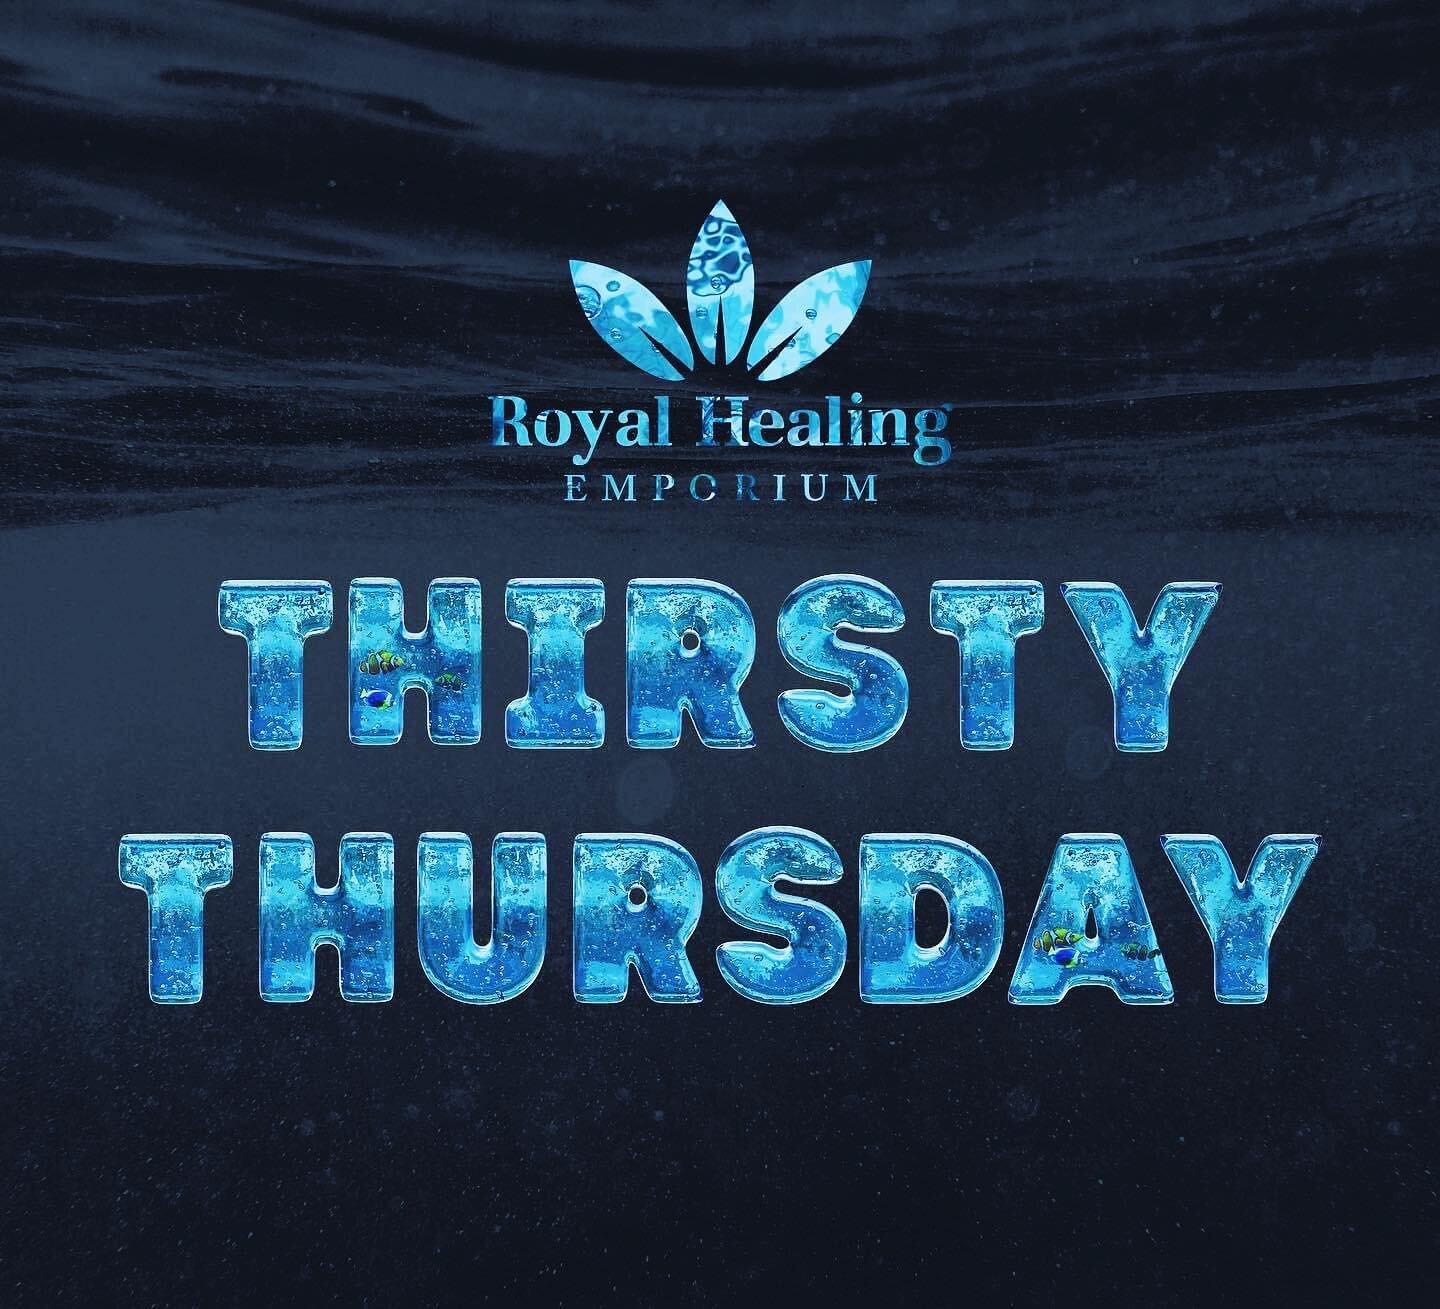 It&rsquo;s that time of the week! 💦 It&rsquo;s #thirstythursday and we have something fresh for you here at #royalhealingemporium